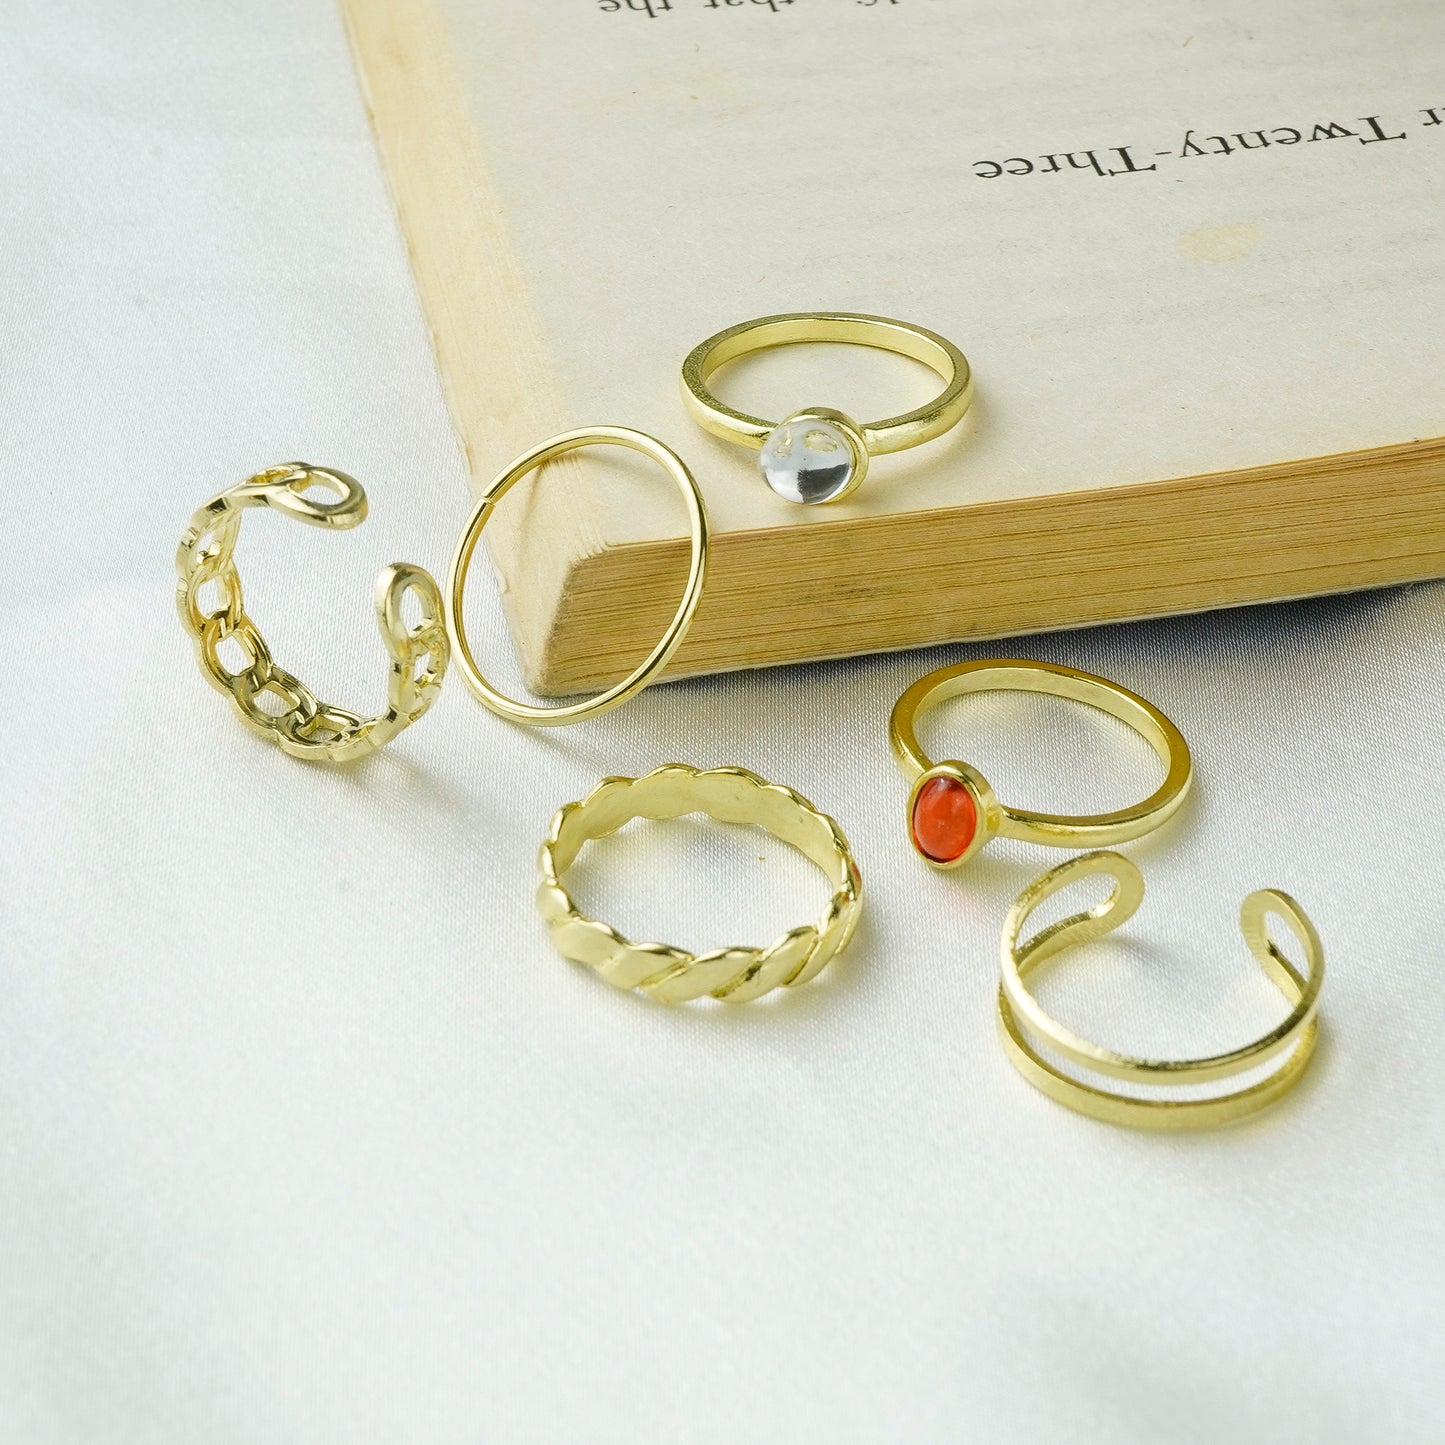 Trendy Set Ring For Fashionable Women(Code:R51)